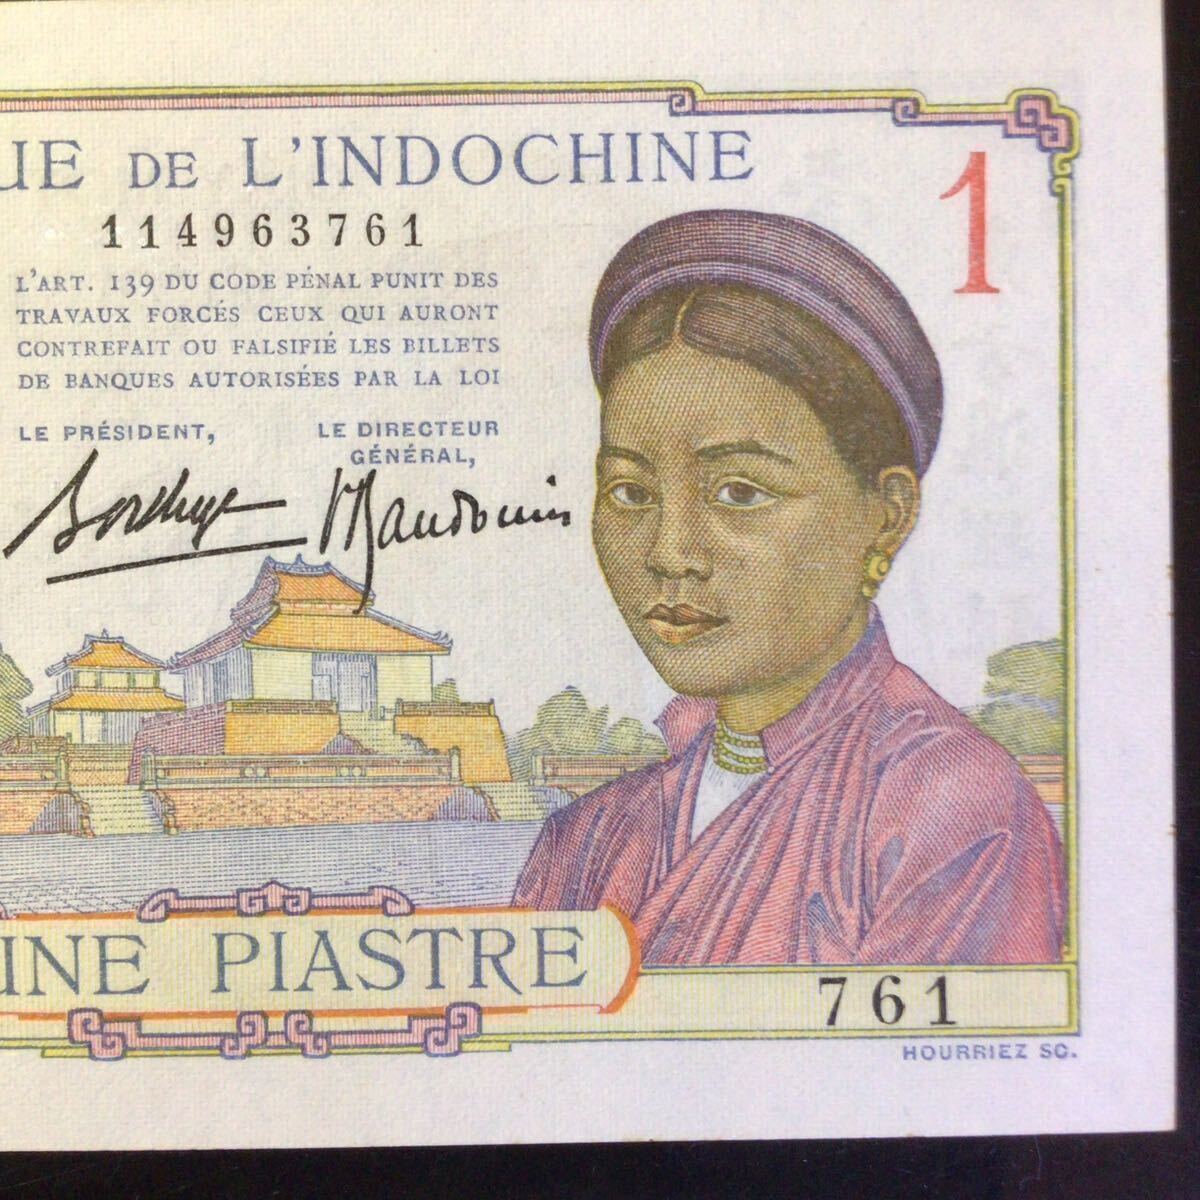 World Banknote Grading FRENCH INDO-CHINA《Banque de l'Indochine》1 Piastre【1936】『PMG Grading Choice Uncirculated 64』_画像5